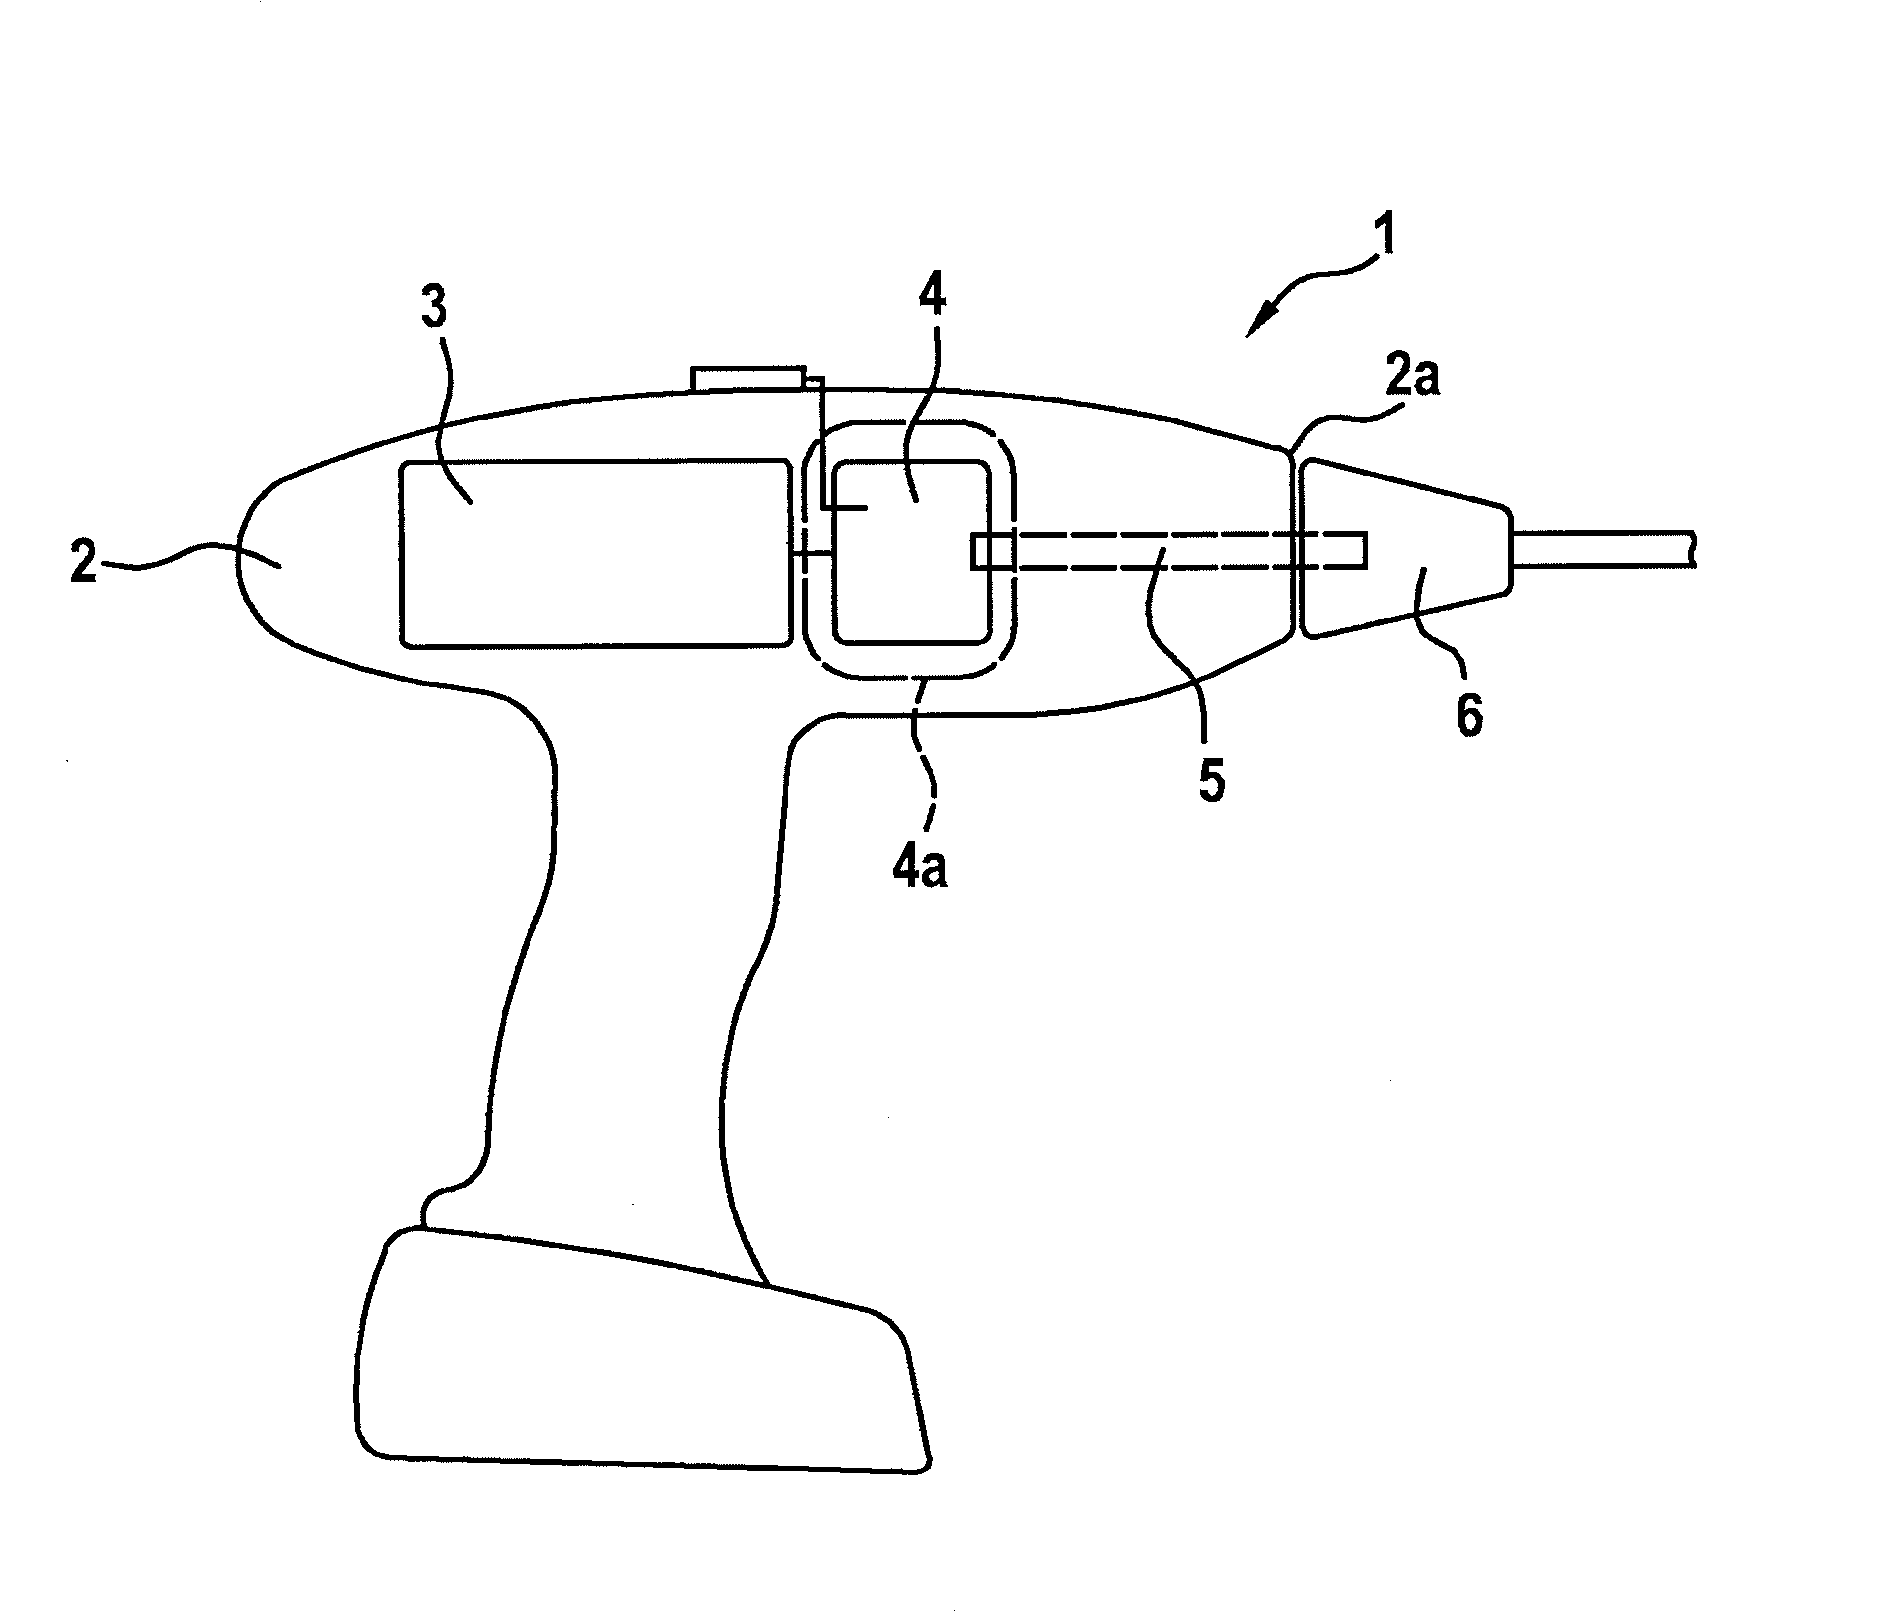 Handheld machine tool, in particular a hammer drill